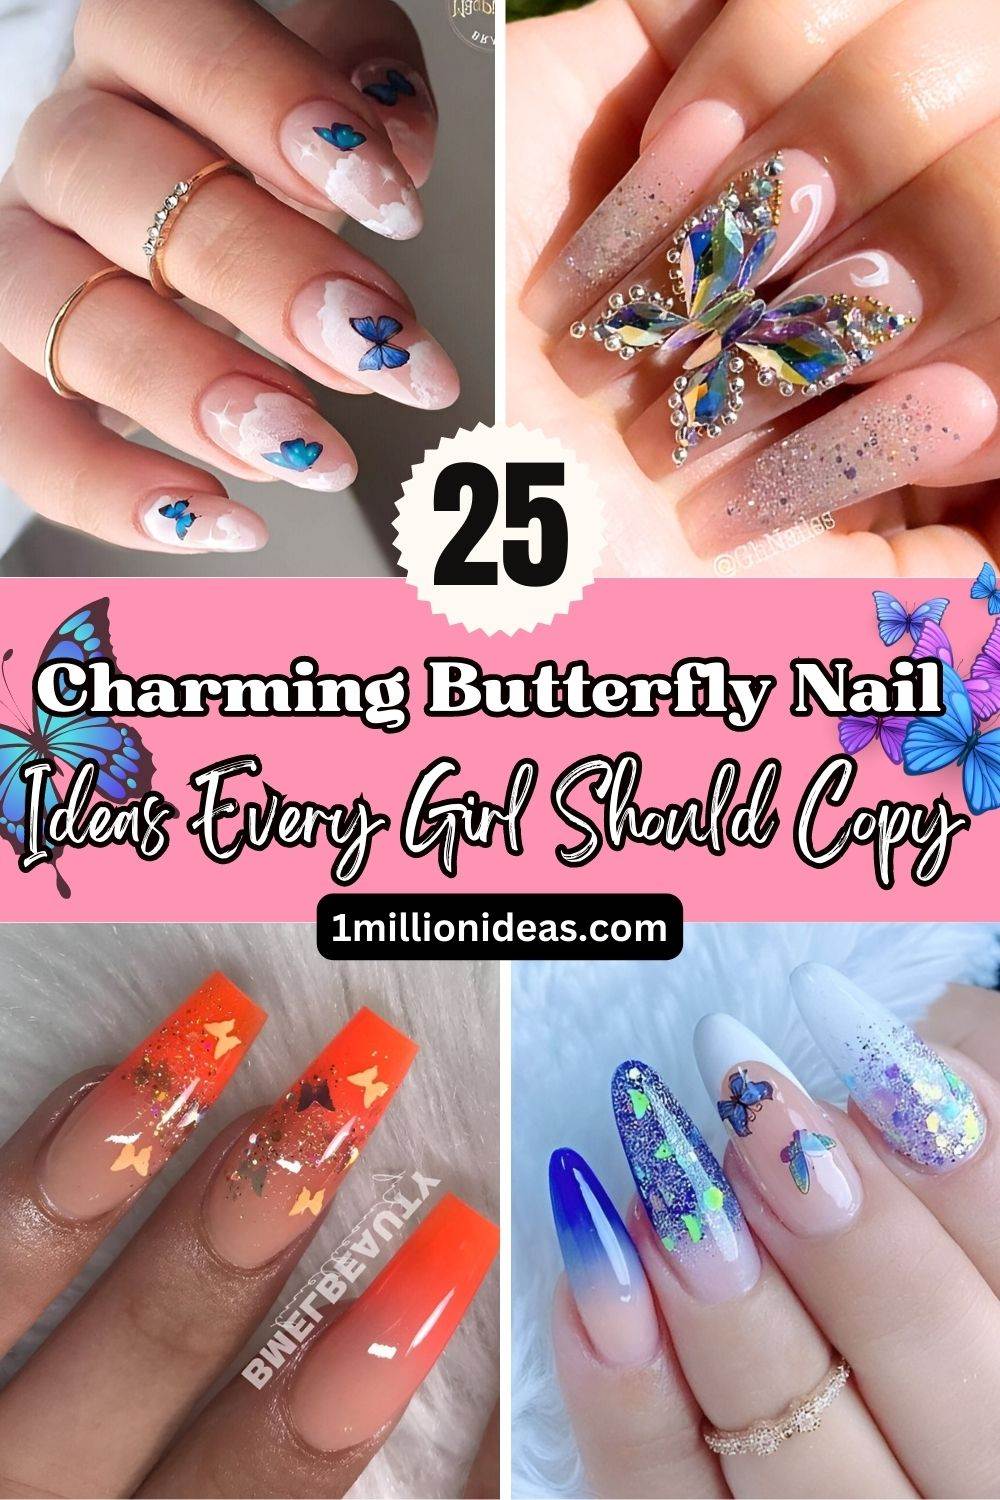 25 Charming Butterfly Nail Ideas Every Girl Should Copy ASAP - 161